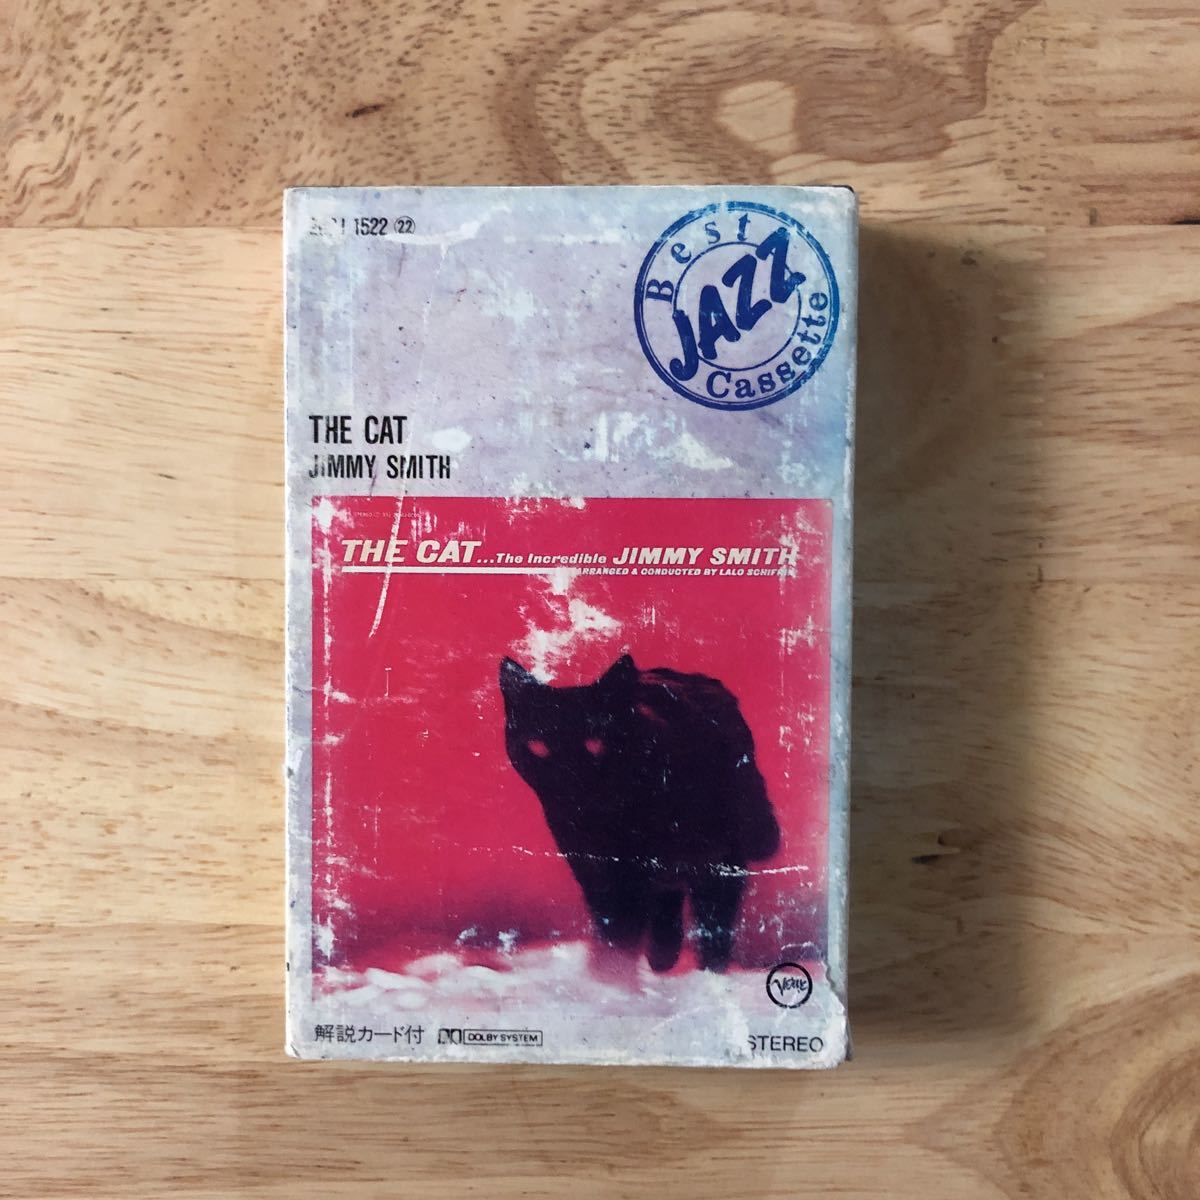 CT rare cassette tape JIMMY SMITHjimi-* Smith /THE CAT[ domestic record : out s Lee vu: explanation attaching :KENNY BURRELL(g)GRADY TATE(dr):mod jazz masterpiece!!]